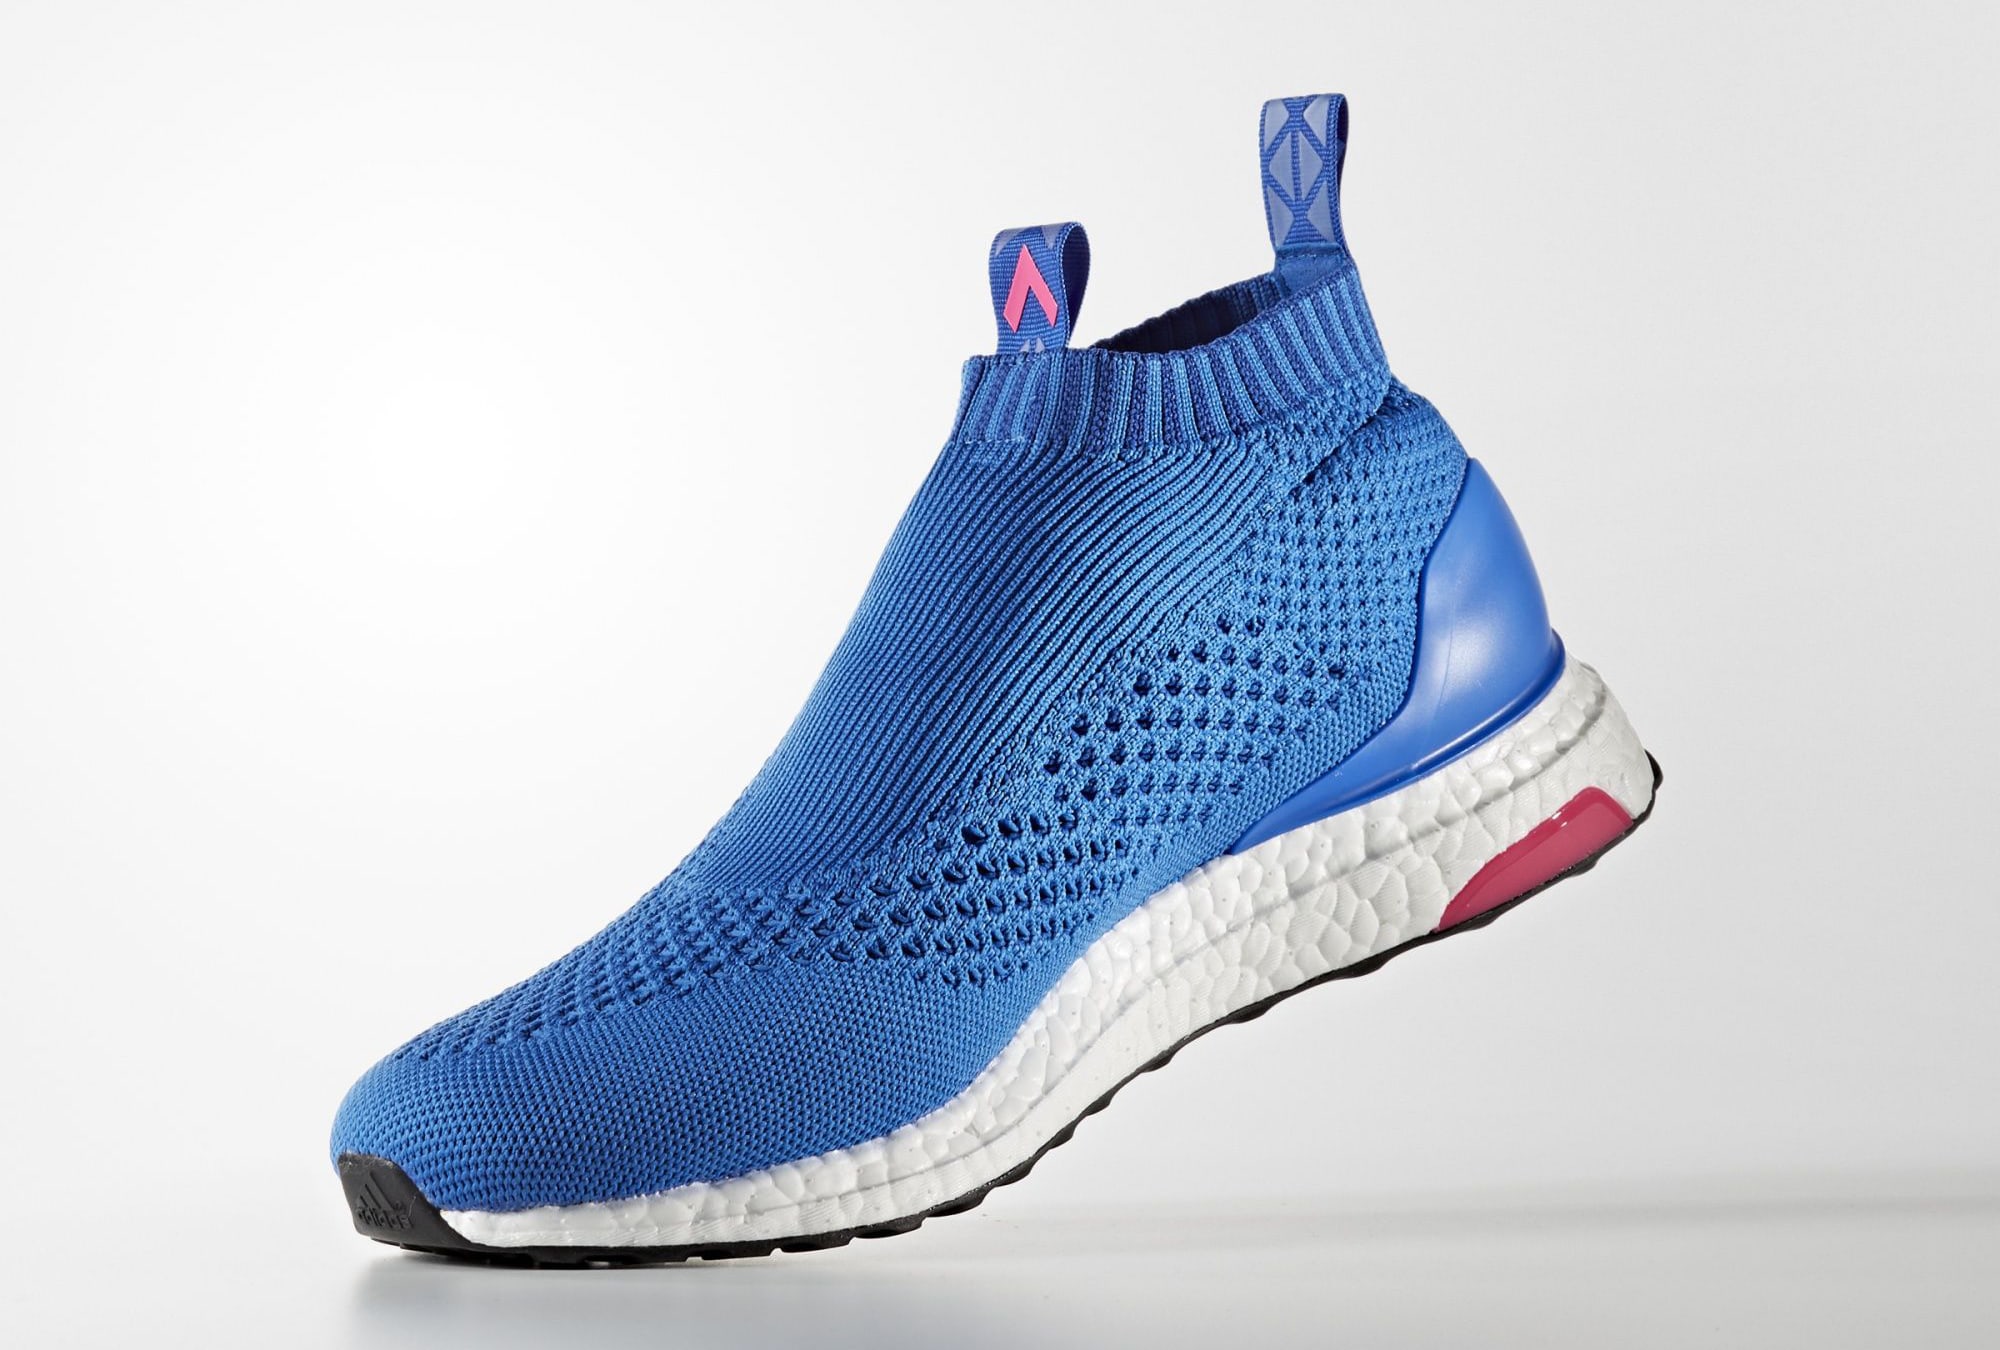 Adidas Ace 16 Pure Control Ultra Boost BY9090 Blue Pink Medial